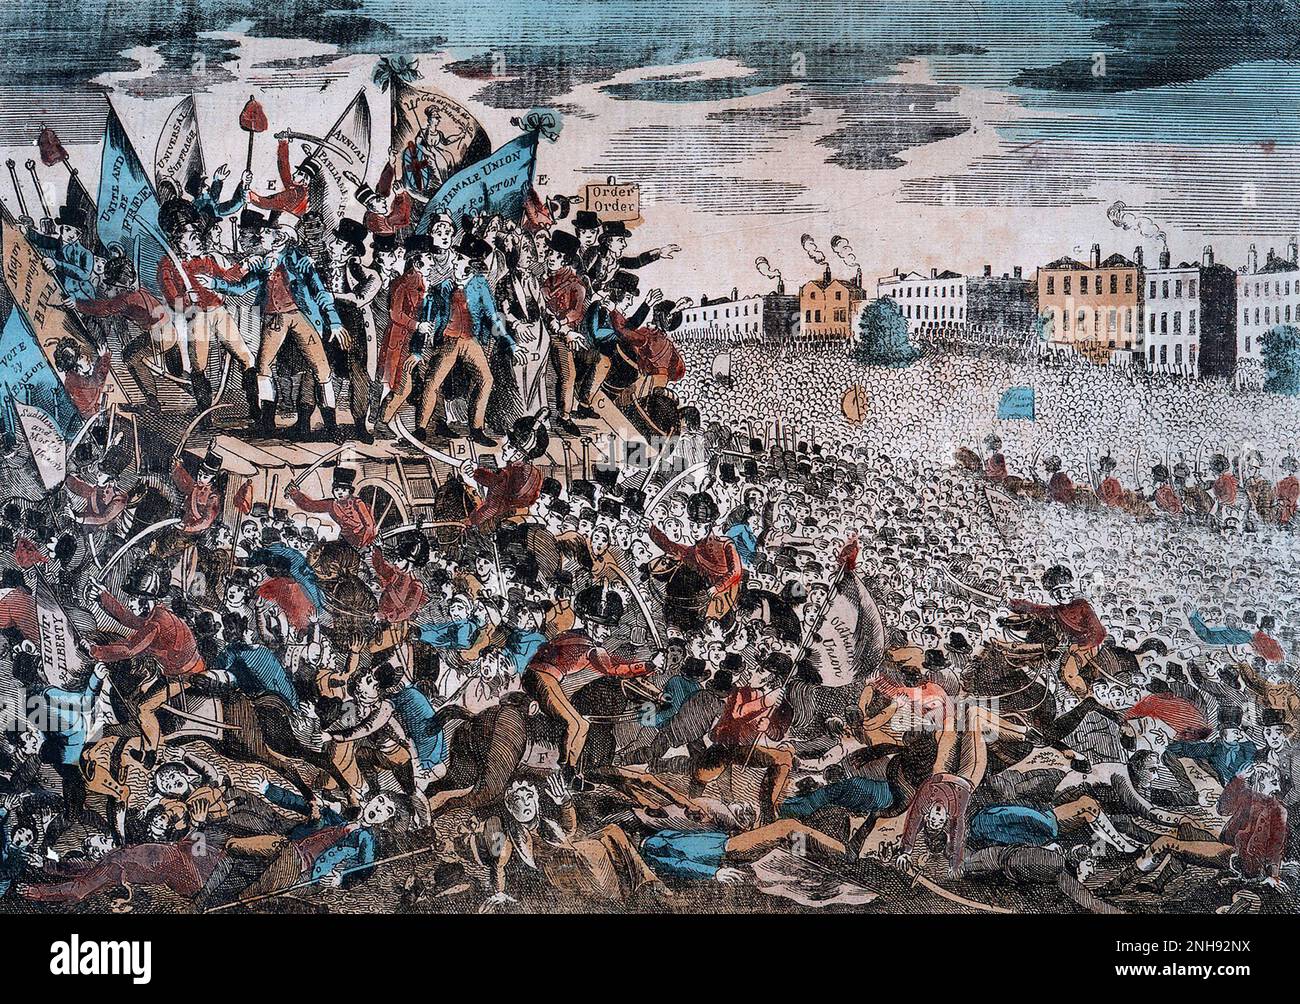 The Peterloo Massacre took place at St Peter's Field, Manchester, Lancashire, England, on Monday 16 August 1819. Fifteen people died when cavalry charged into a crowd of around 60,000 people who had gathered to demand the reform of parliamentary representation. This print was published on the 27th of August, 1819, and depicts radical orator Henry Hunt's arrest by constables. Stock Photo